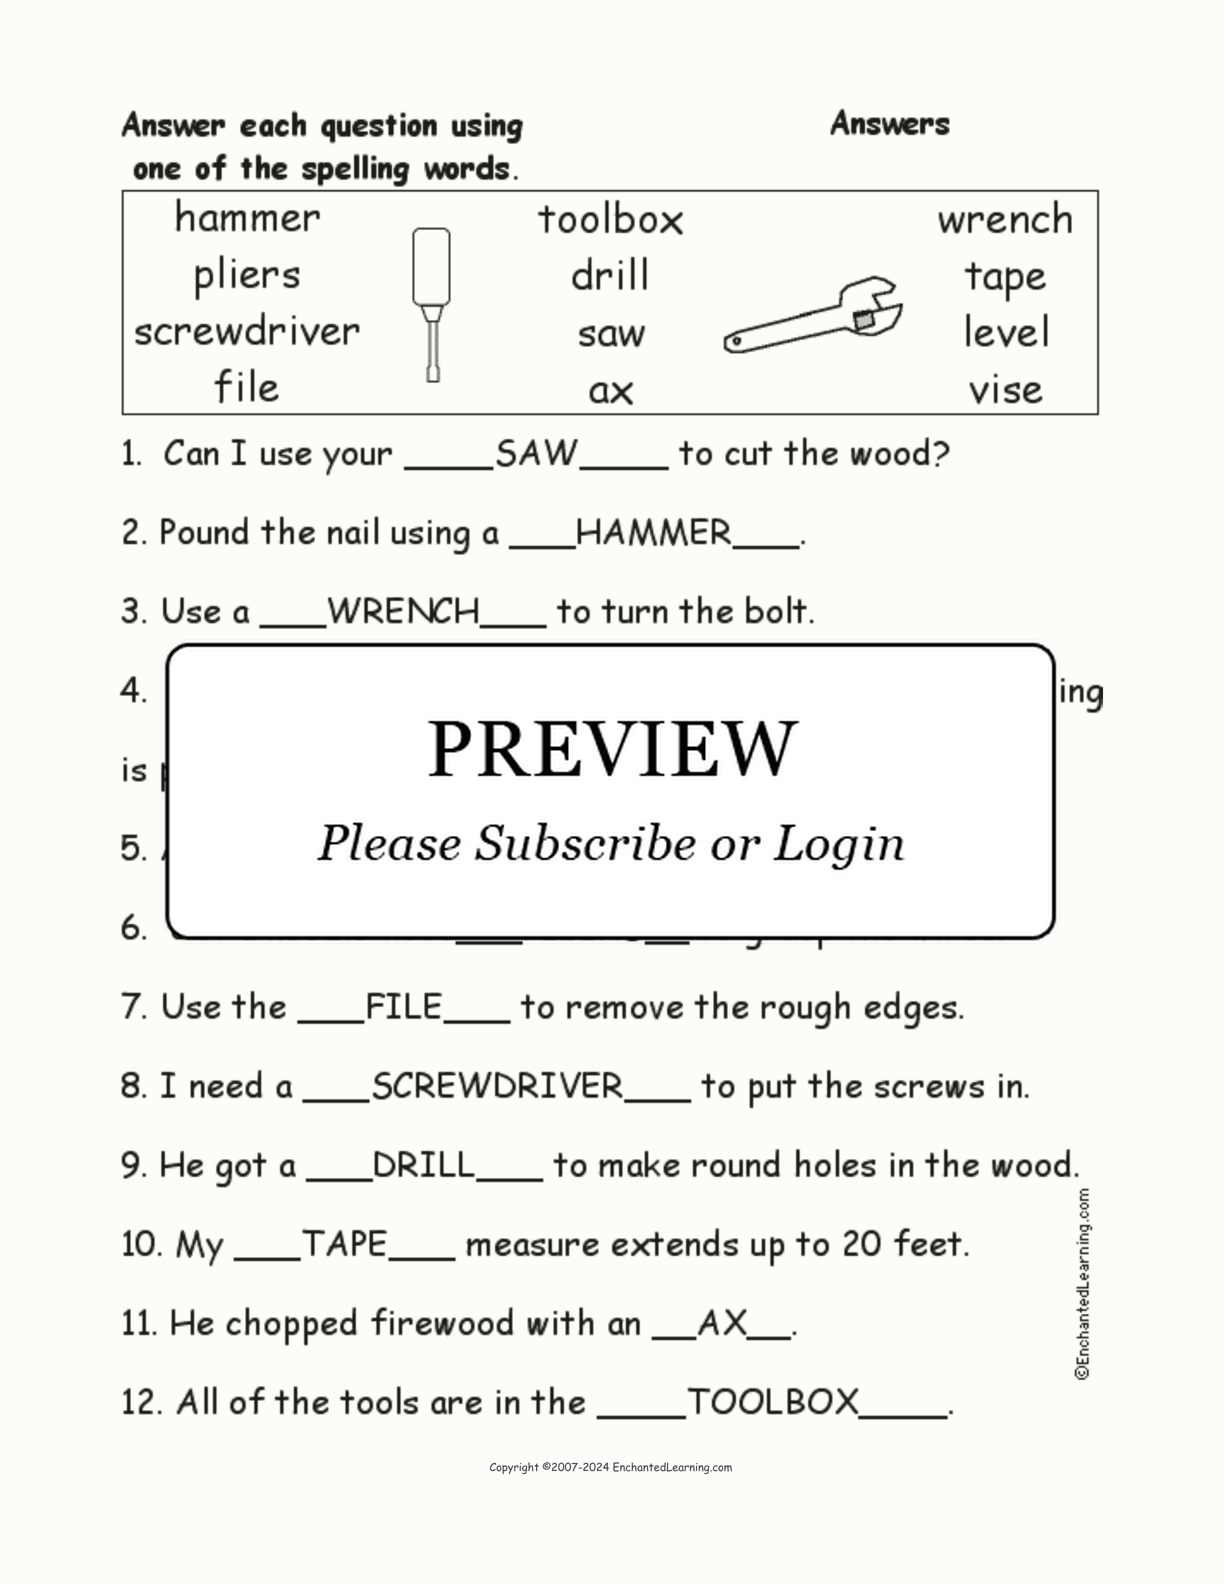 Tools: Spelling Word Questions interactive worksheet page 2